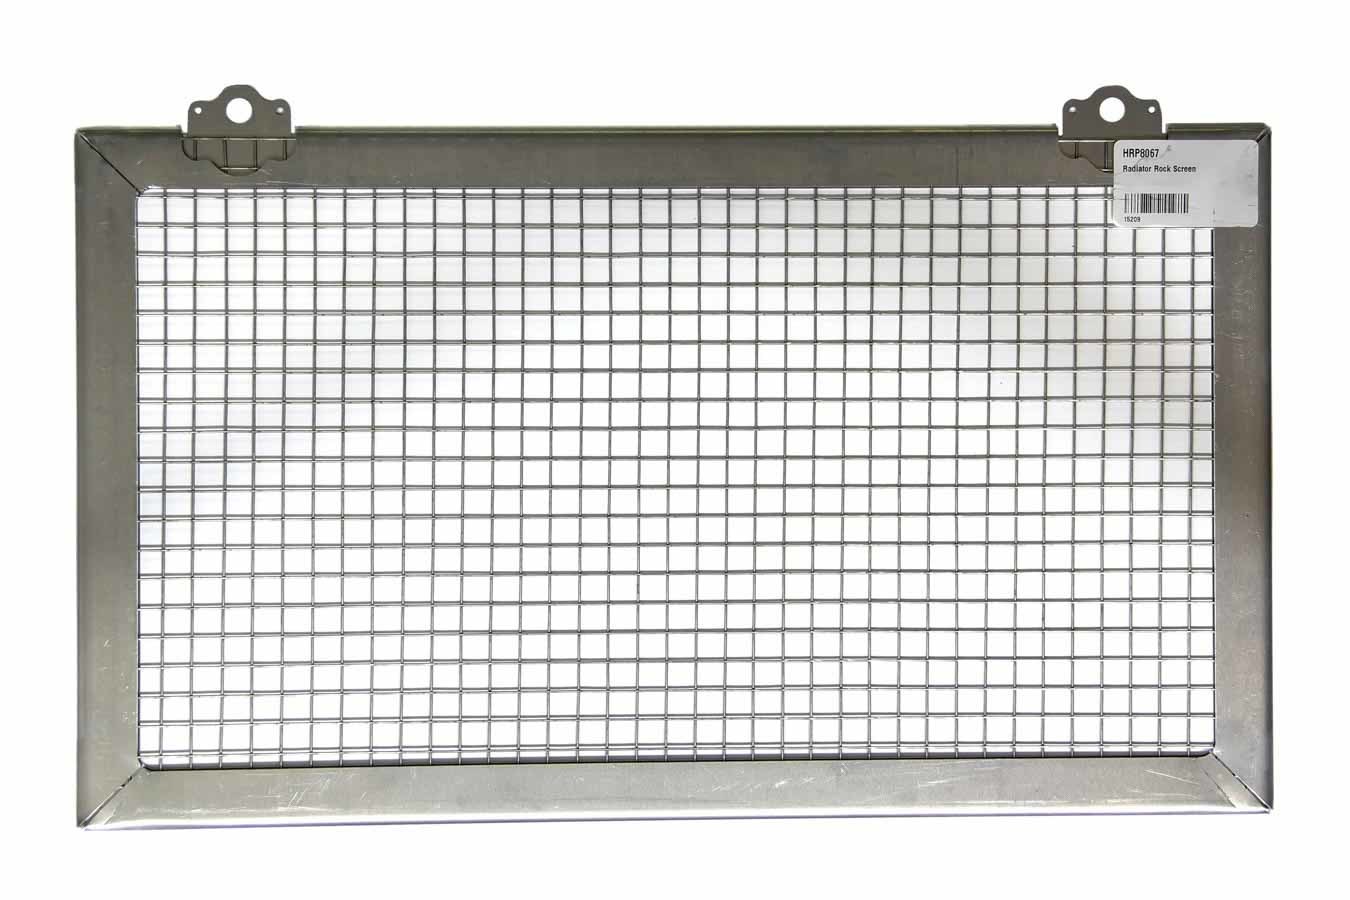 Hepfner Racing Products 8067 Radiator Screen, 20-3/8 x 12 in, Stainless Screen, Aluminum Frame, Natural, Sprint Car, Each